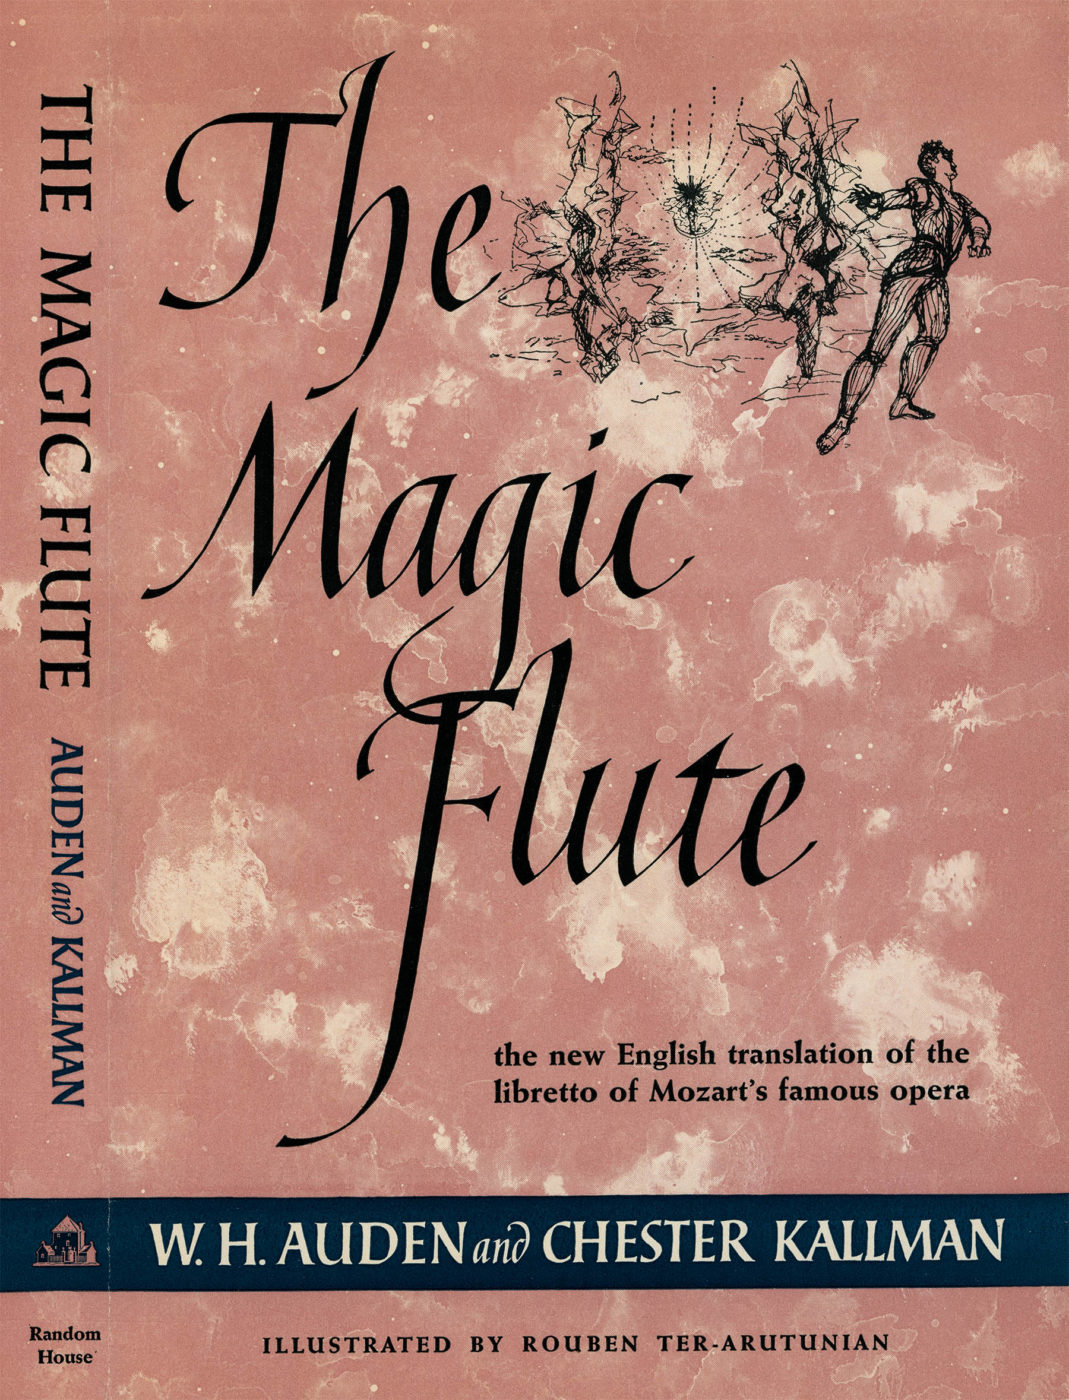 Book jacket of The Magic Flute